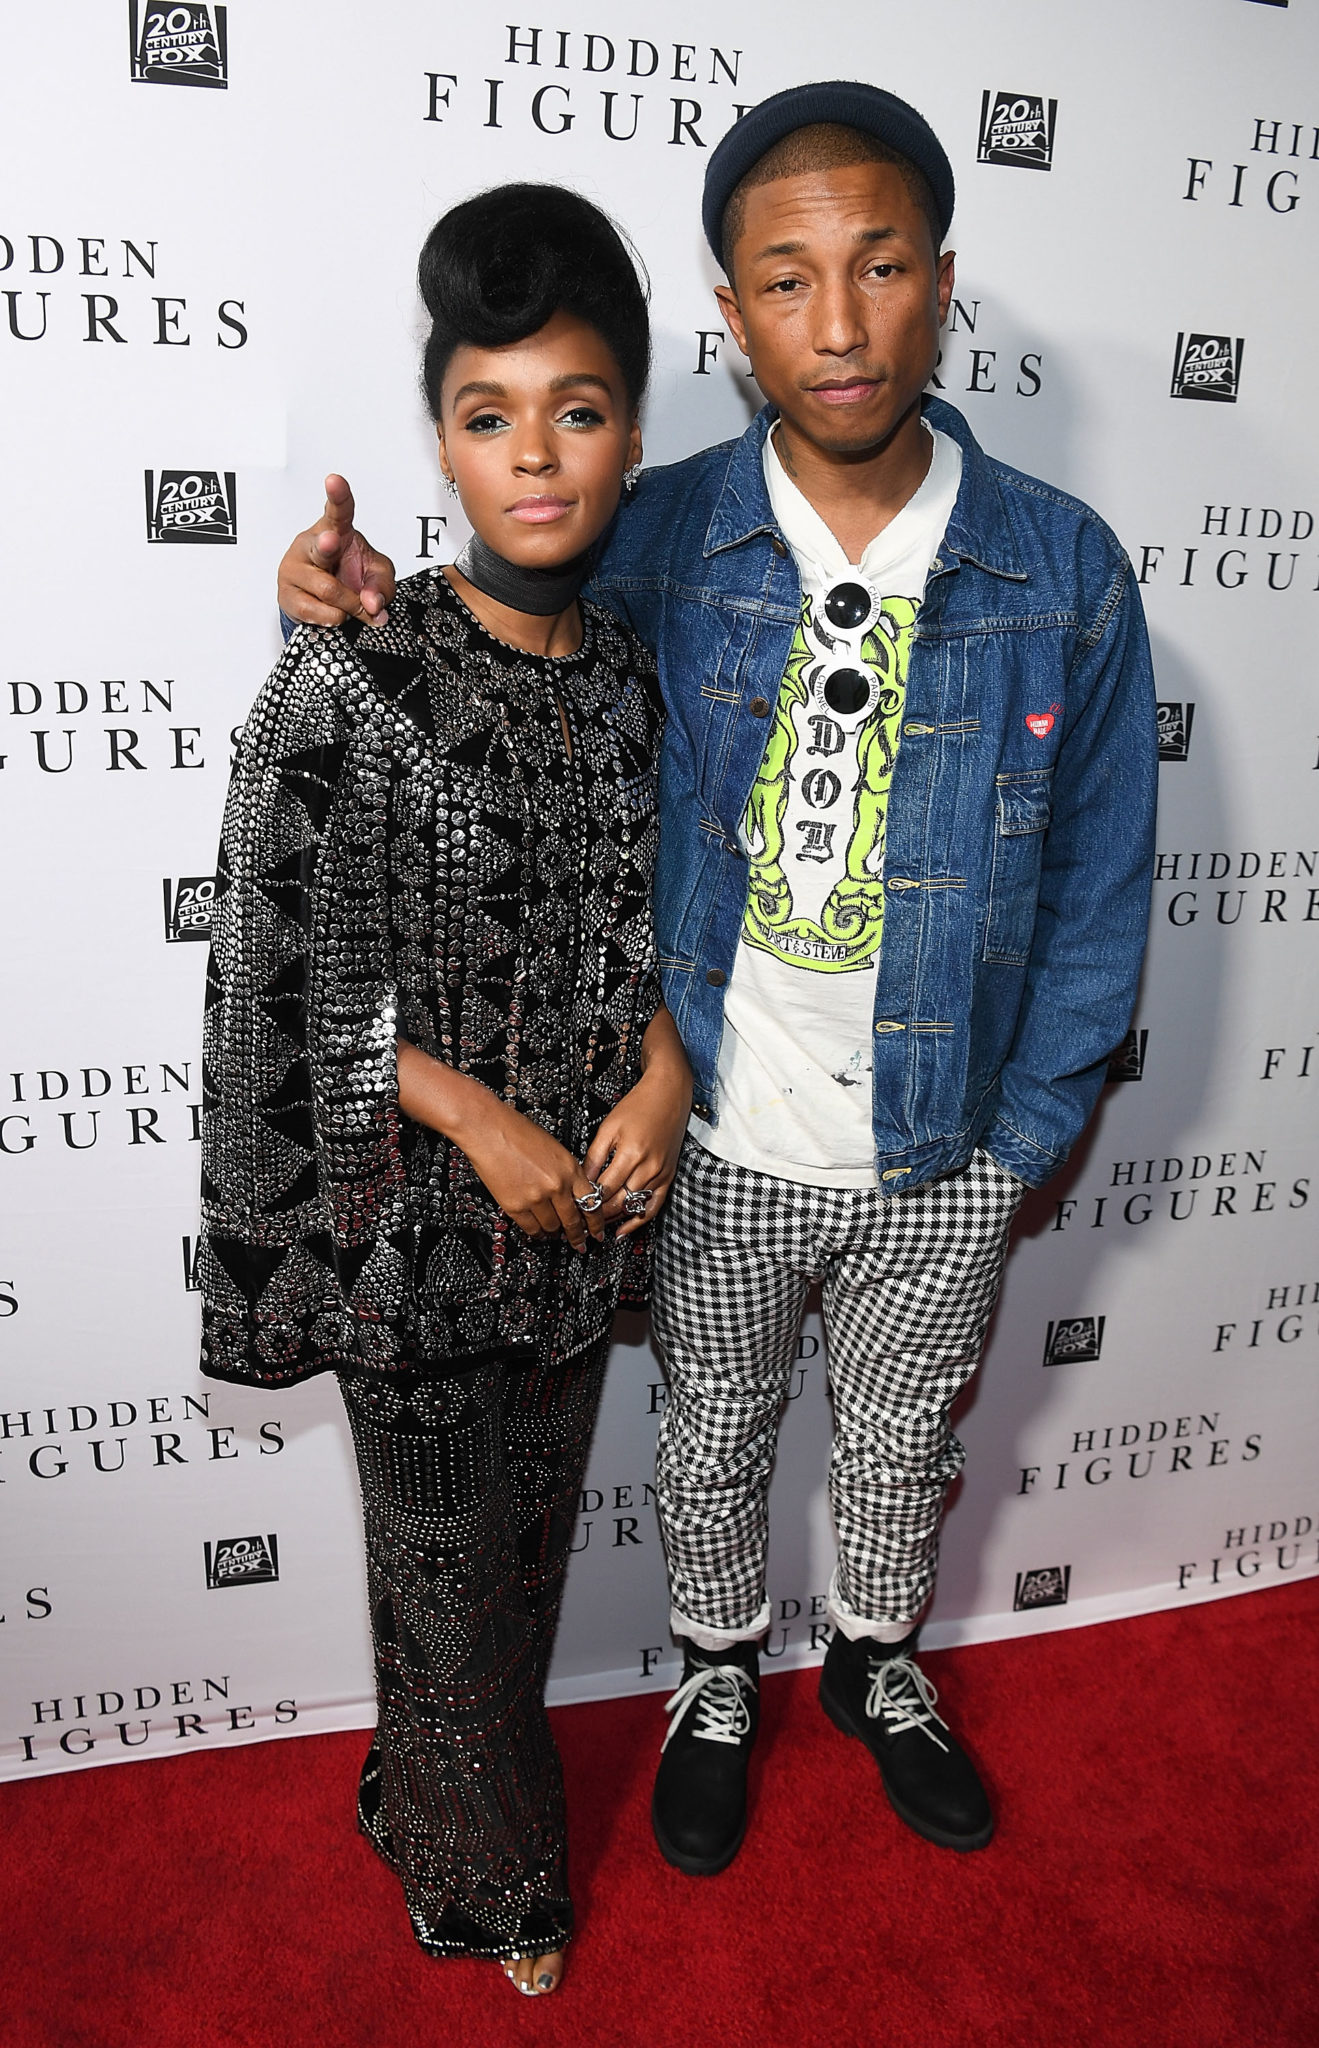 "HIDDEN FIGURES" Soundtrack Listening Party Hosted by DJ Drama with Janelle Monae & Pharrell Williams